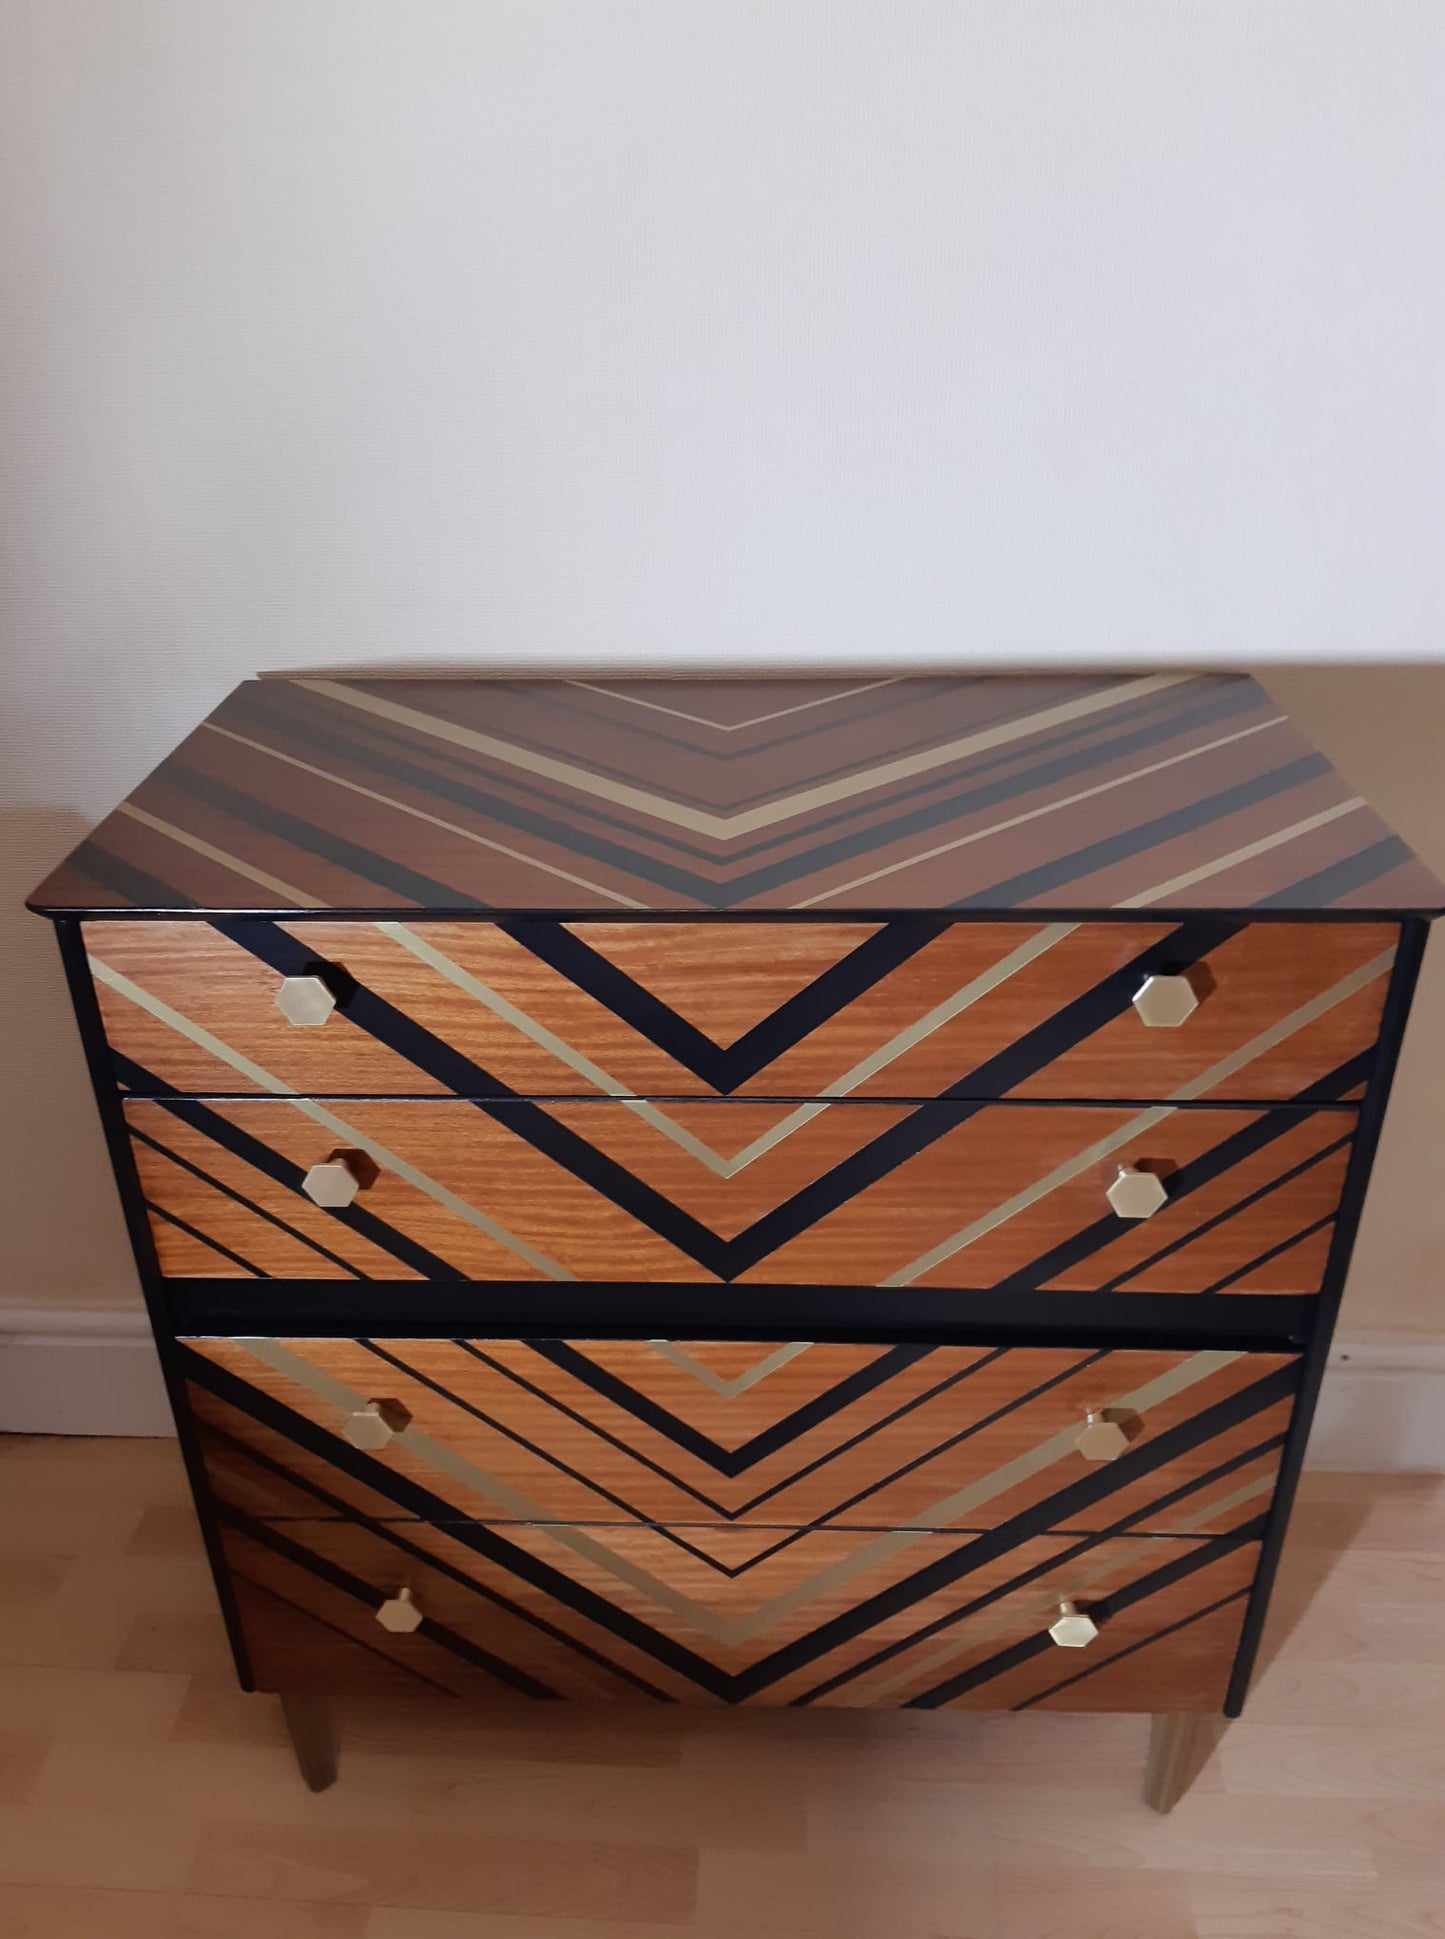 ONLINE COURSE: Cutting Edge Furniture Upcycling with Done up North